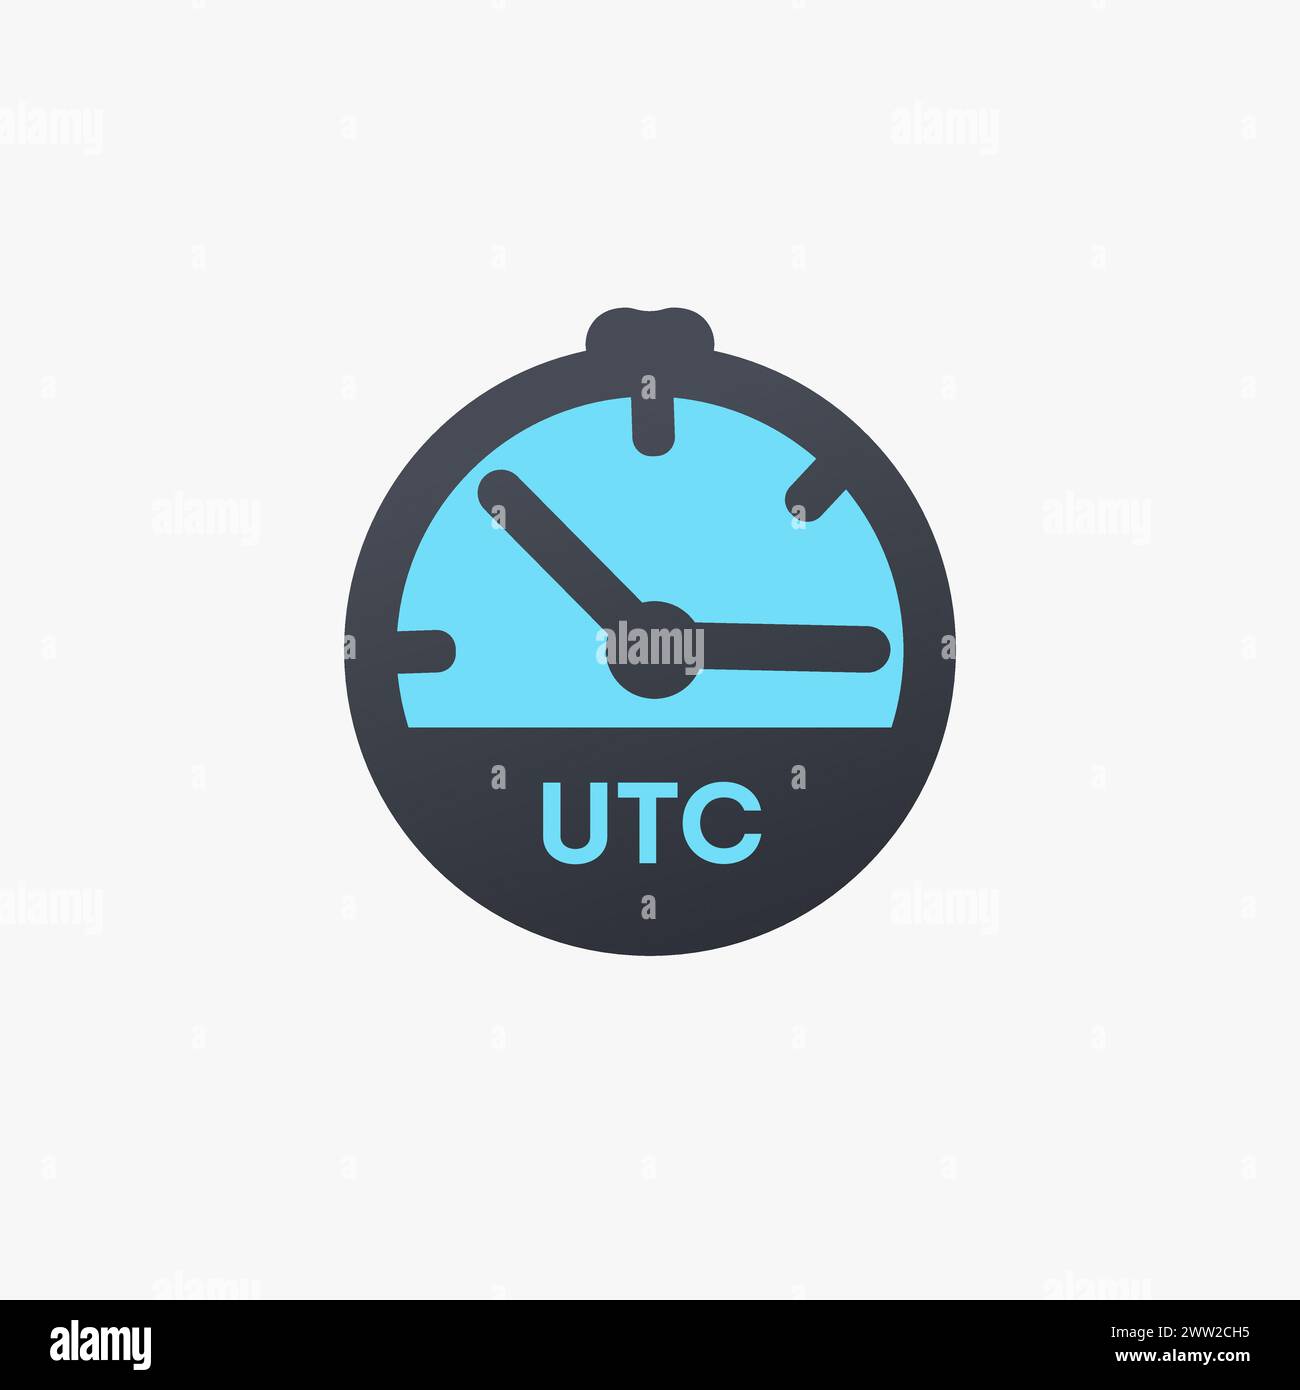 Coordinated Universal Time UTC clock icon. Time zones of Europe, primary time standard globally used to regulate clocks and time. Stock vector Stock Vector